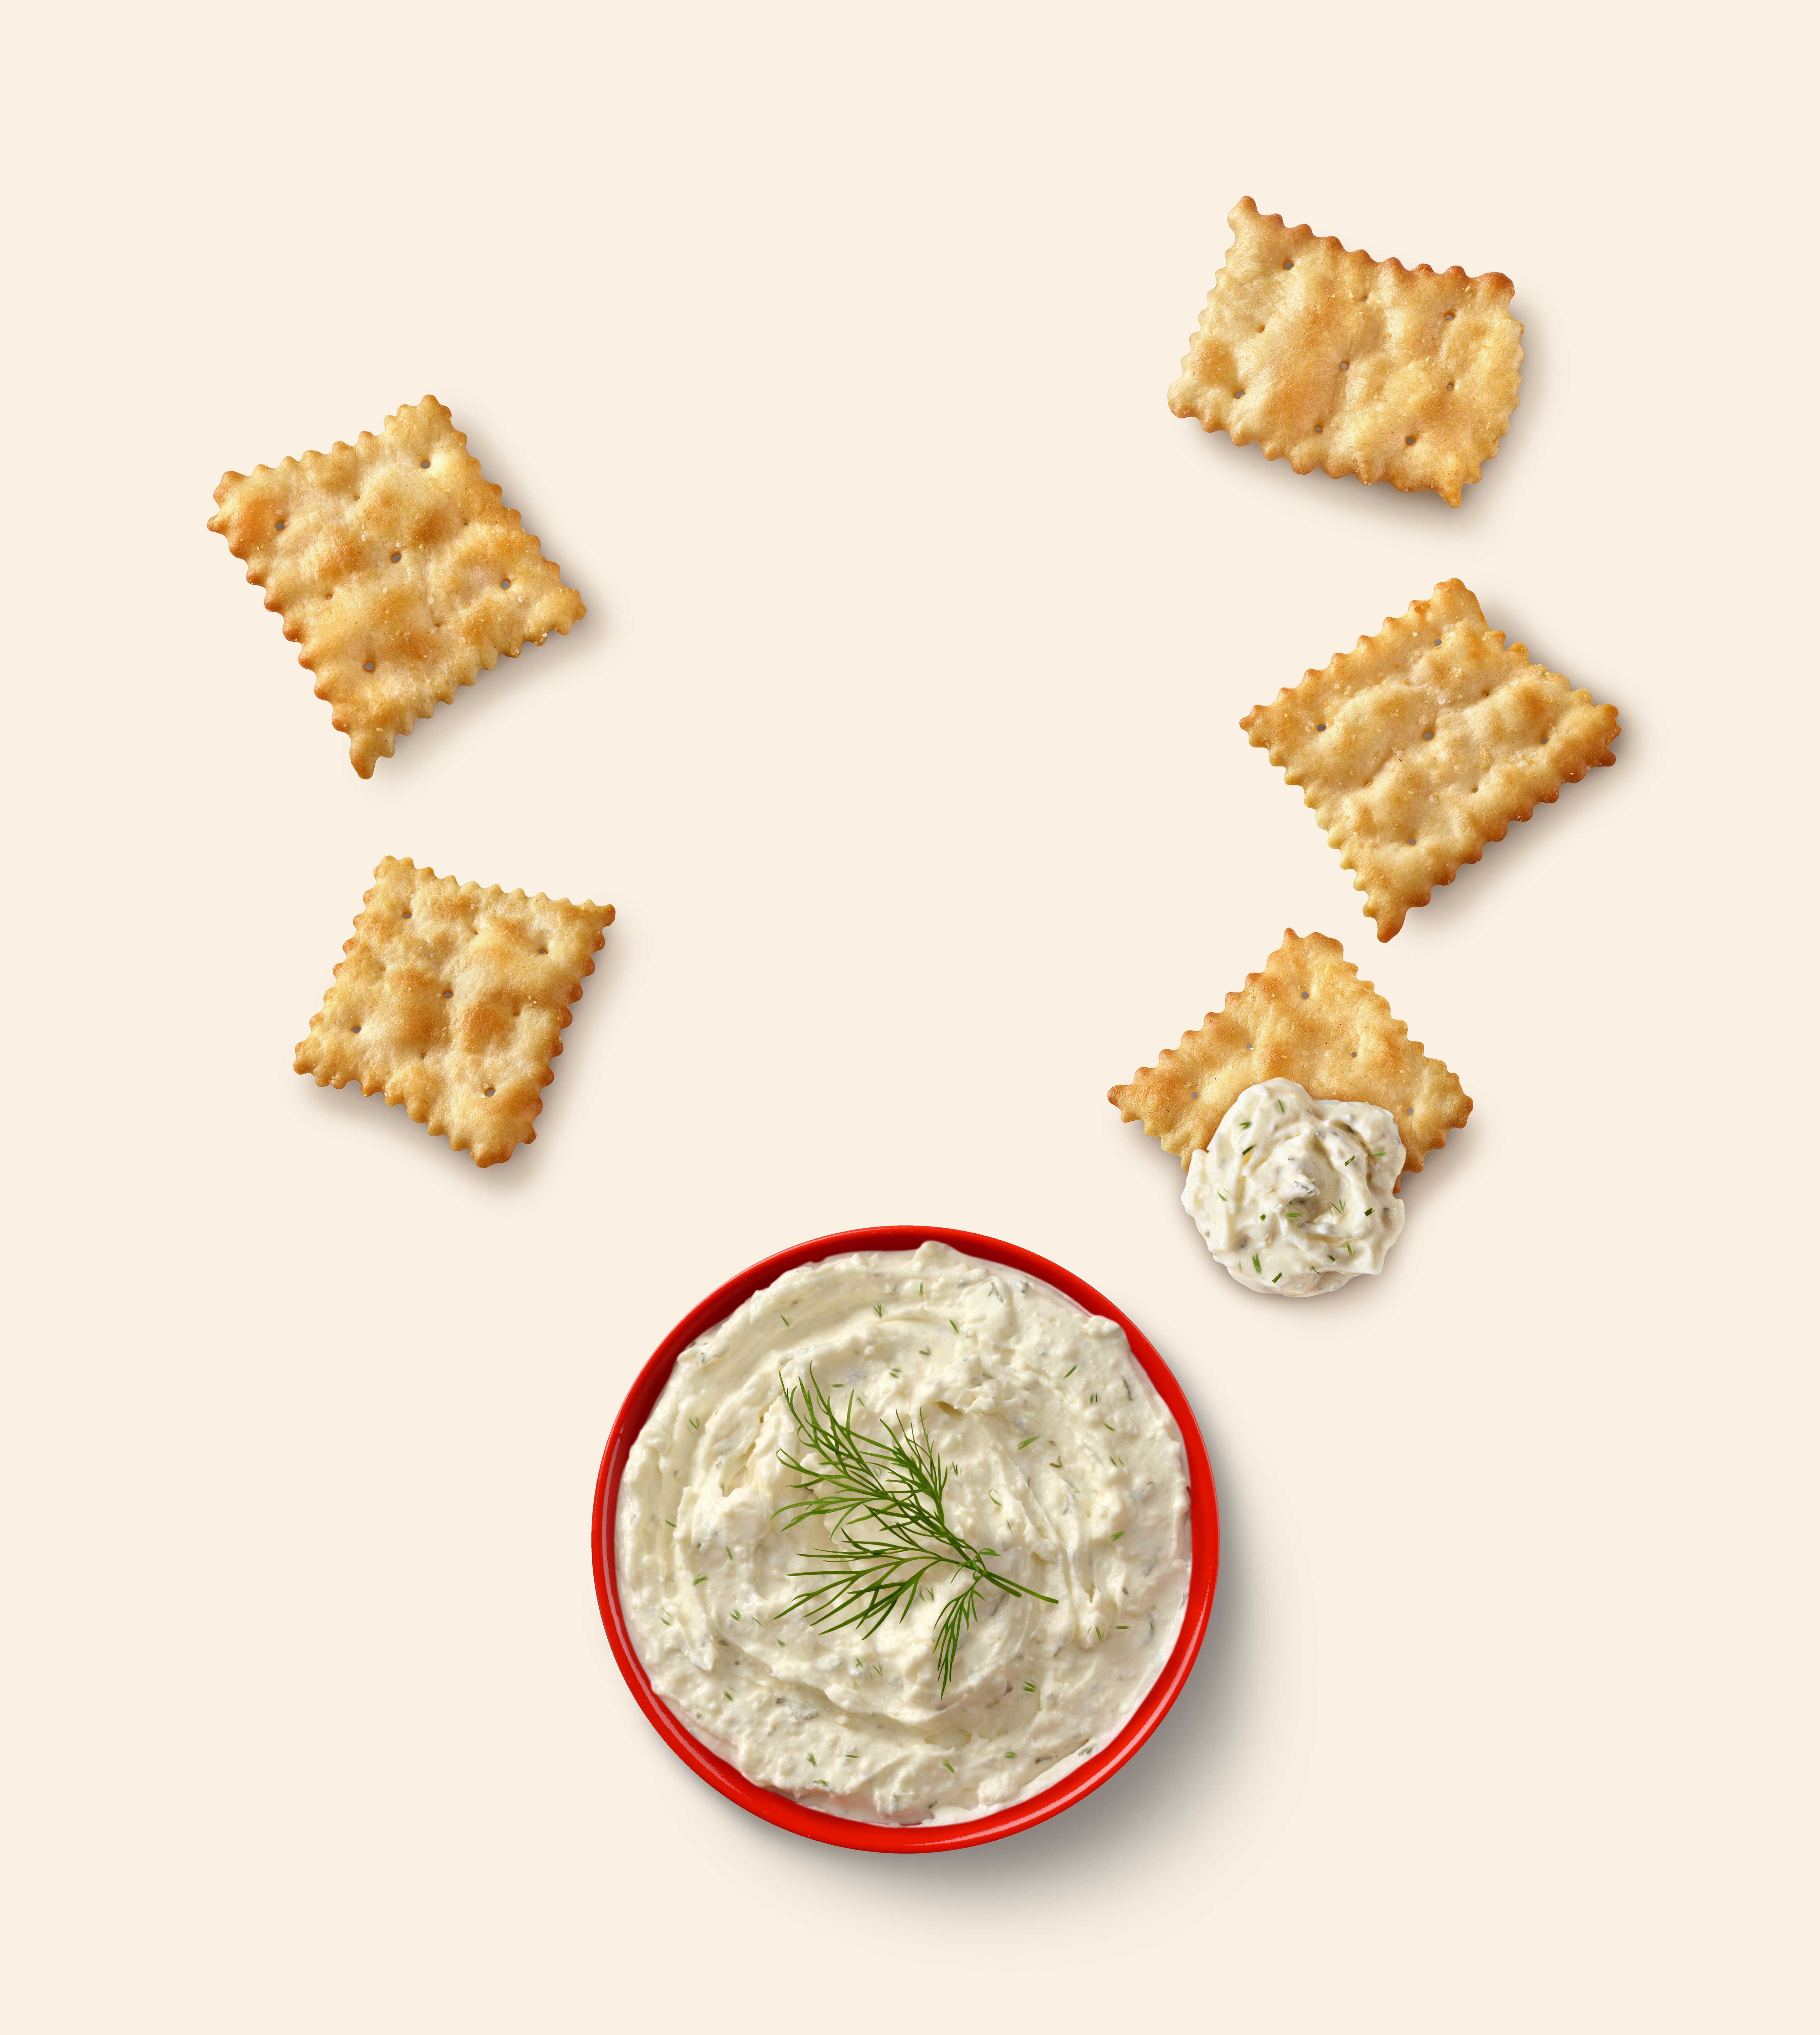 mike wepplo photoreal photography feta and dill dip and crackers